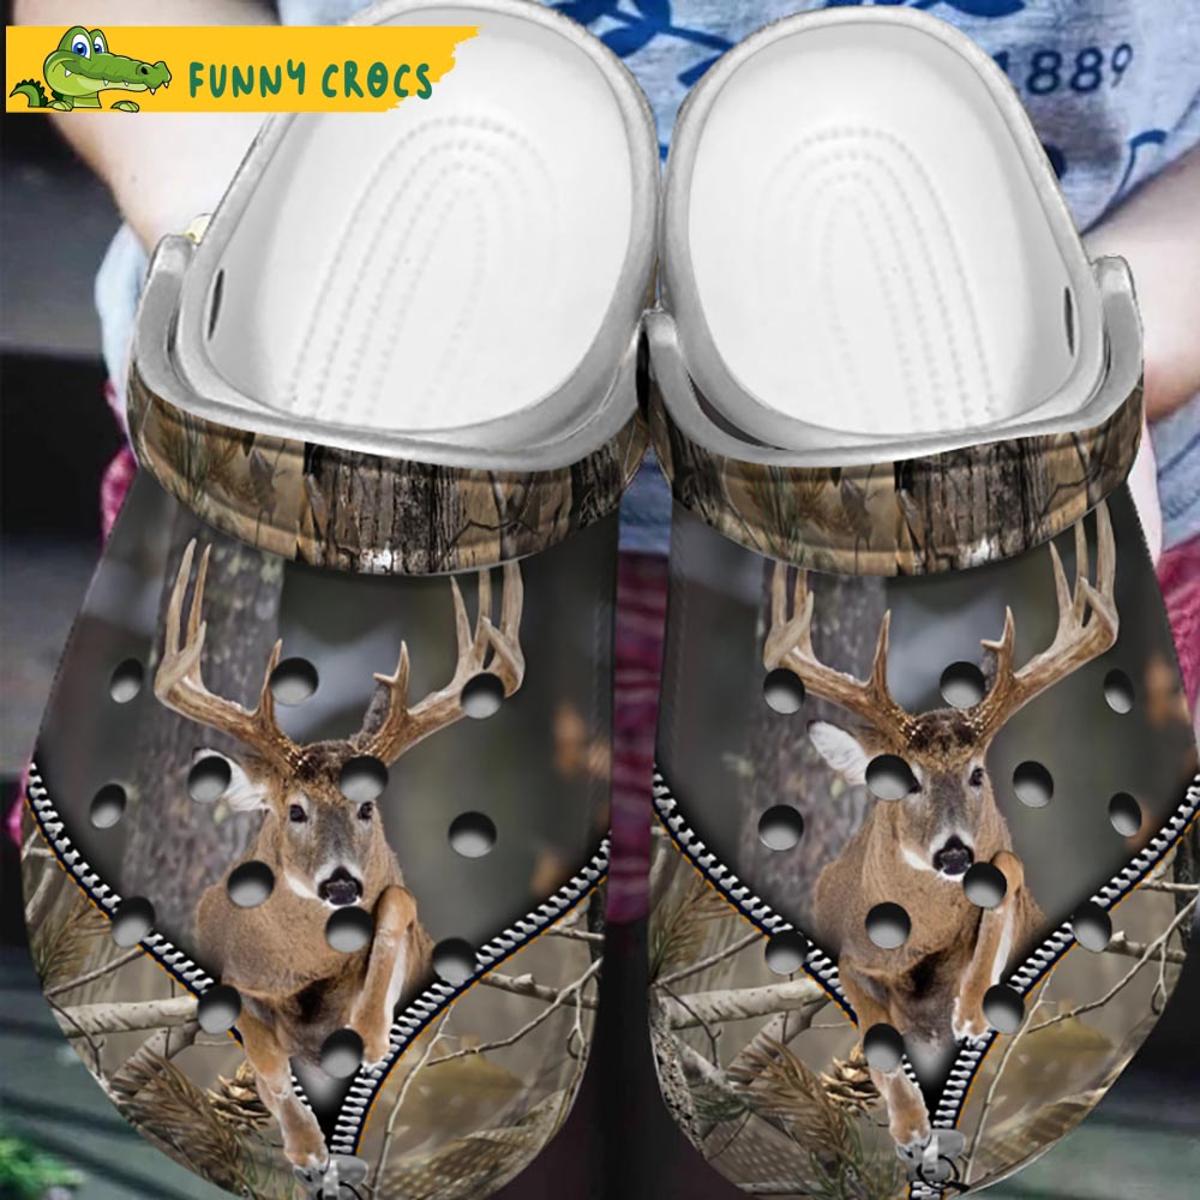 Bow Hunter Limited Edition Crocs Sandals